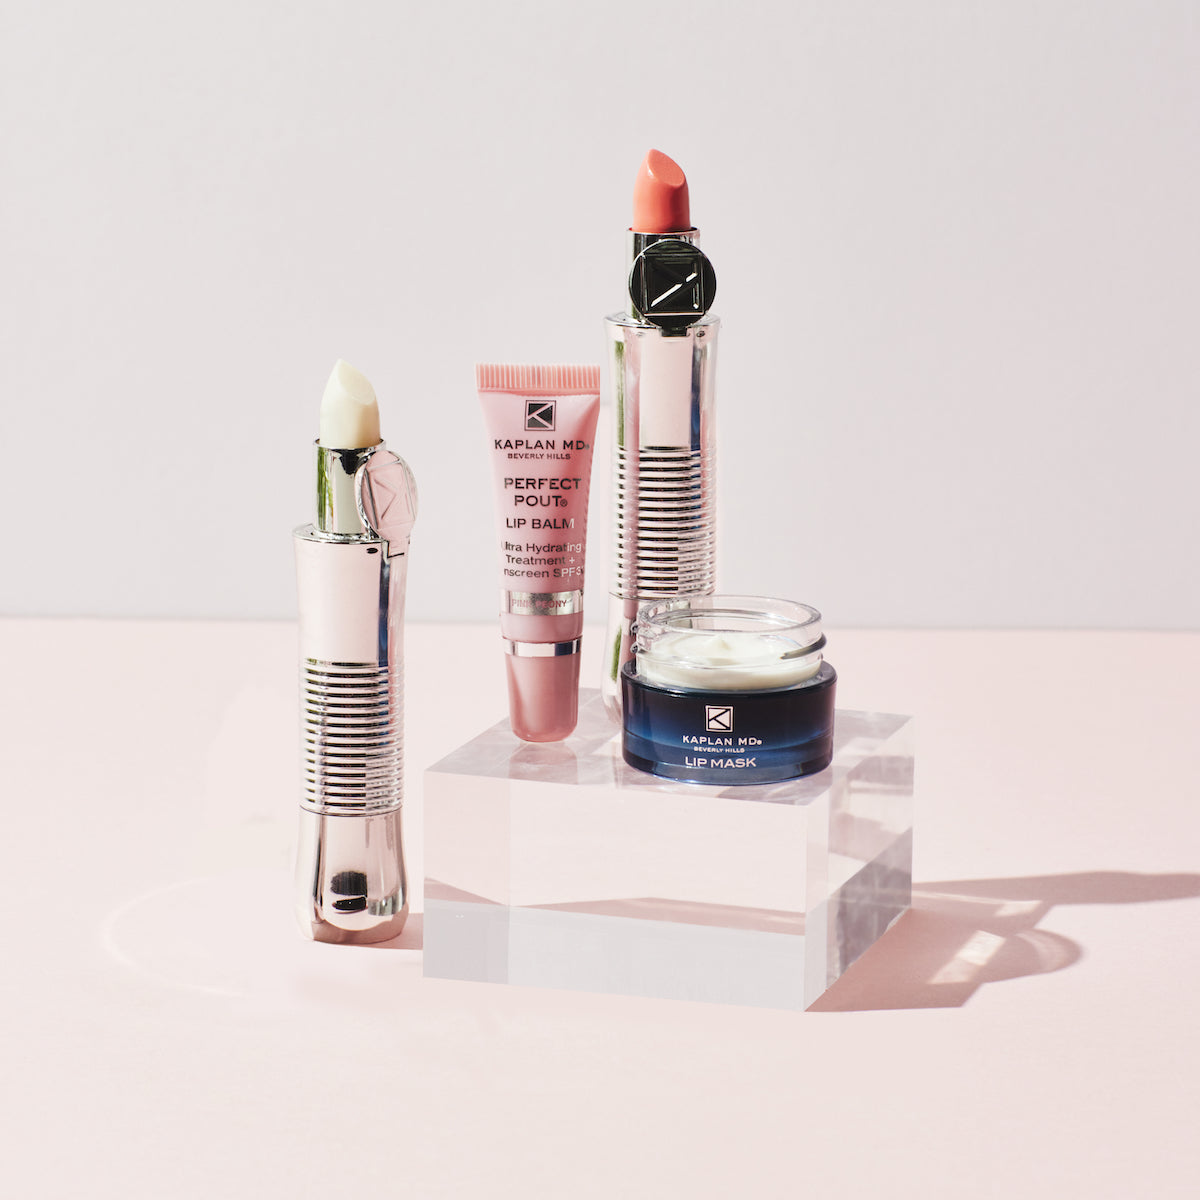 The Perfect Pout Collection: How to Use it for Healthy, Youthful Lips